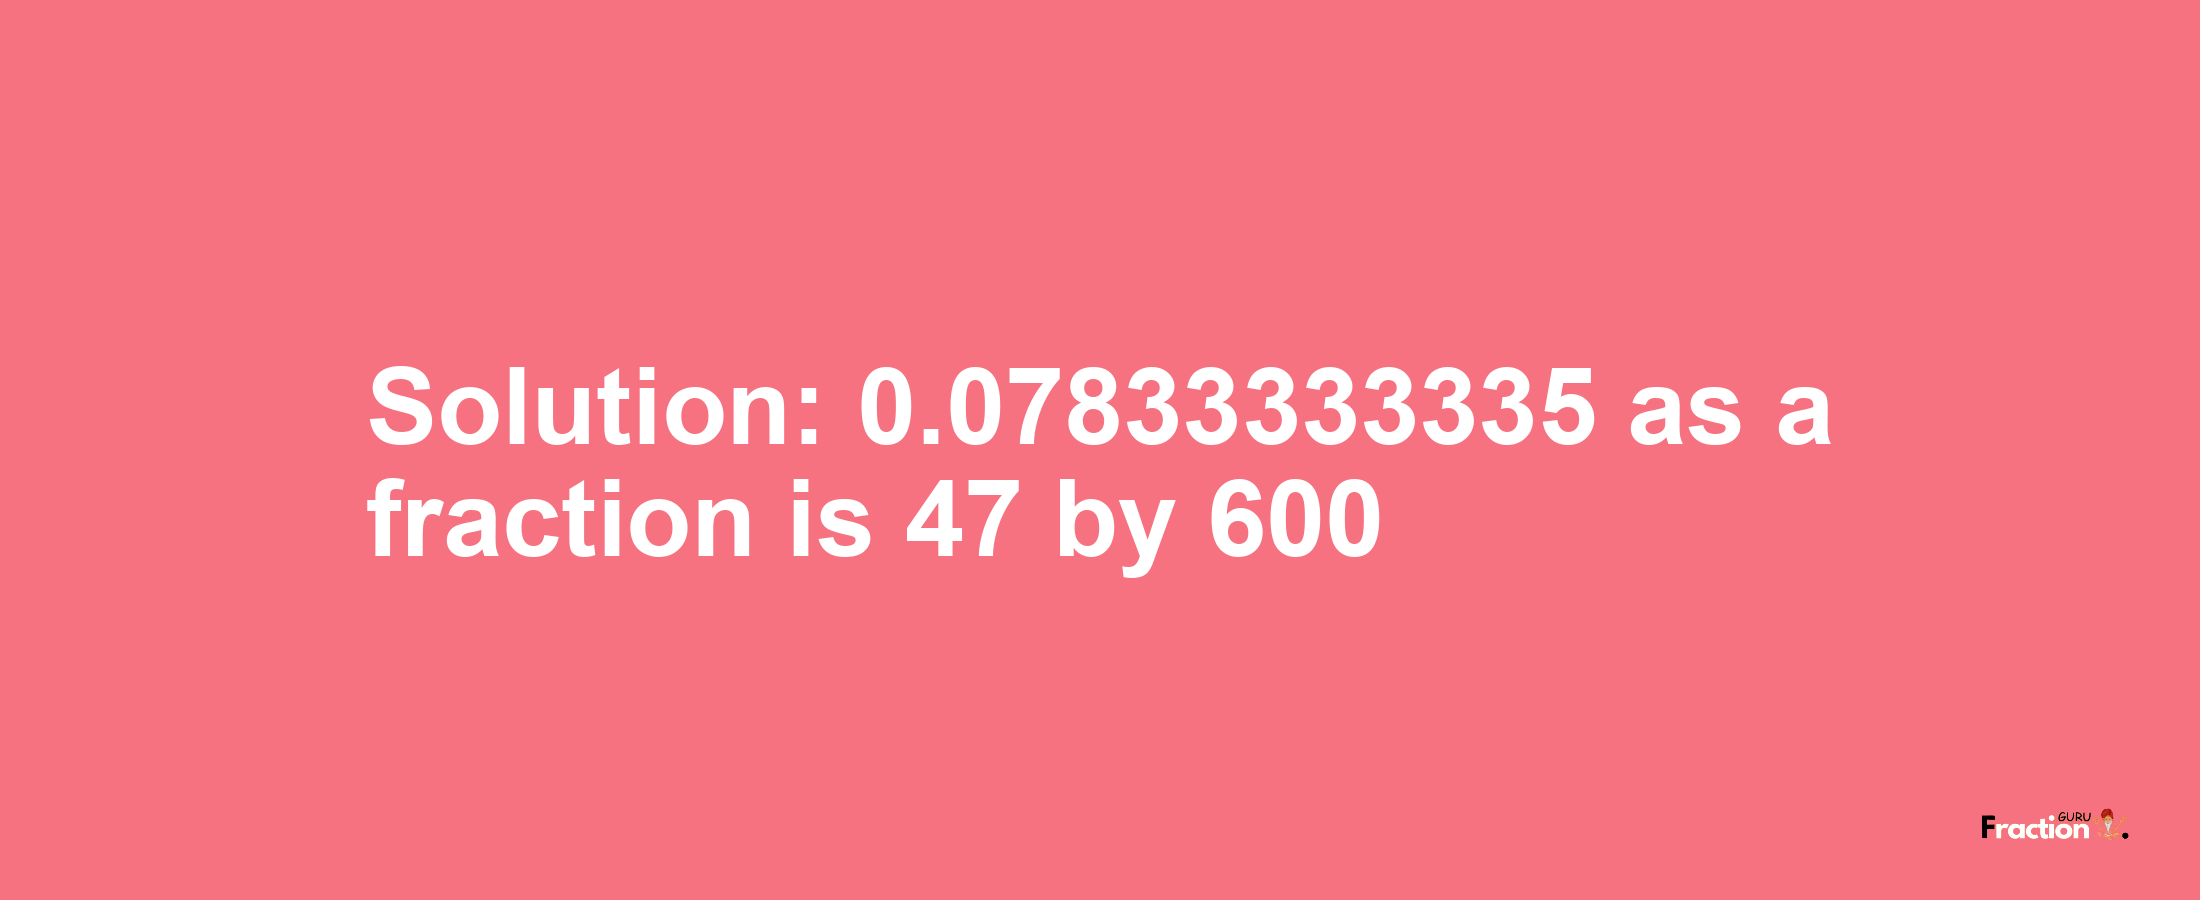 Solution:0.07833333335 as a fraction is 47/600